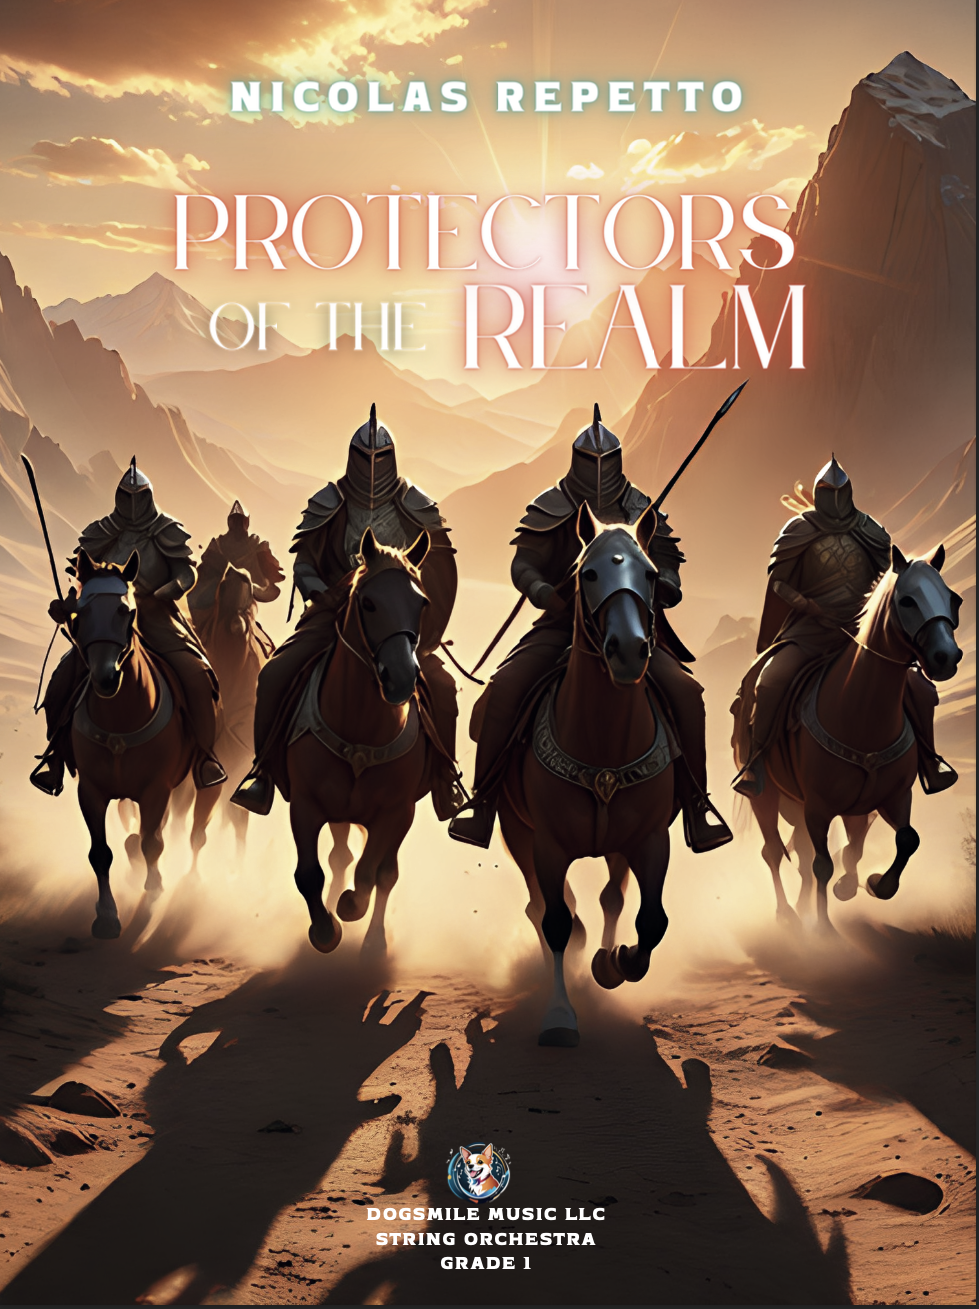 Protectors Of The Realm by Nicolas Repetto